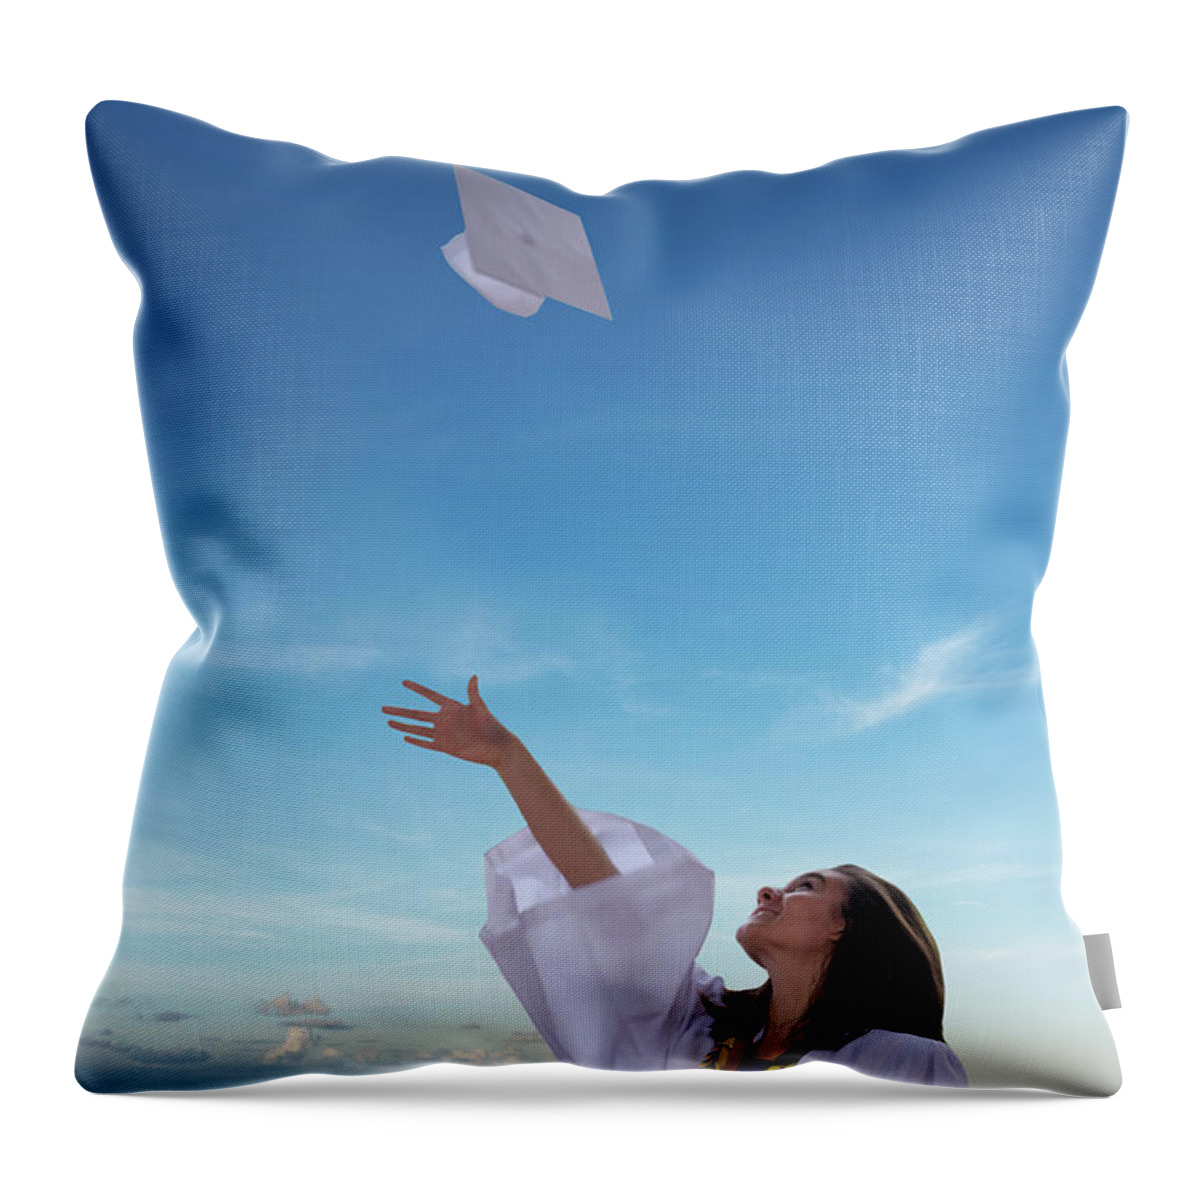 Graduation Throw Pillow featuring the photograph The Sky's The Limit Graduation Cap Toss by Laura Fasulo